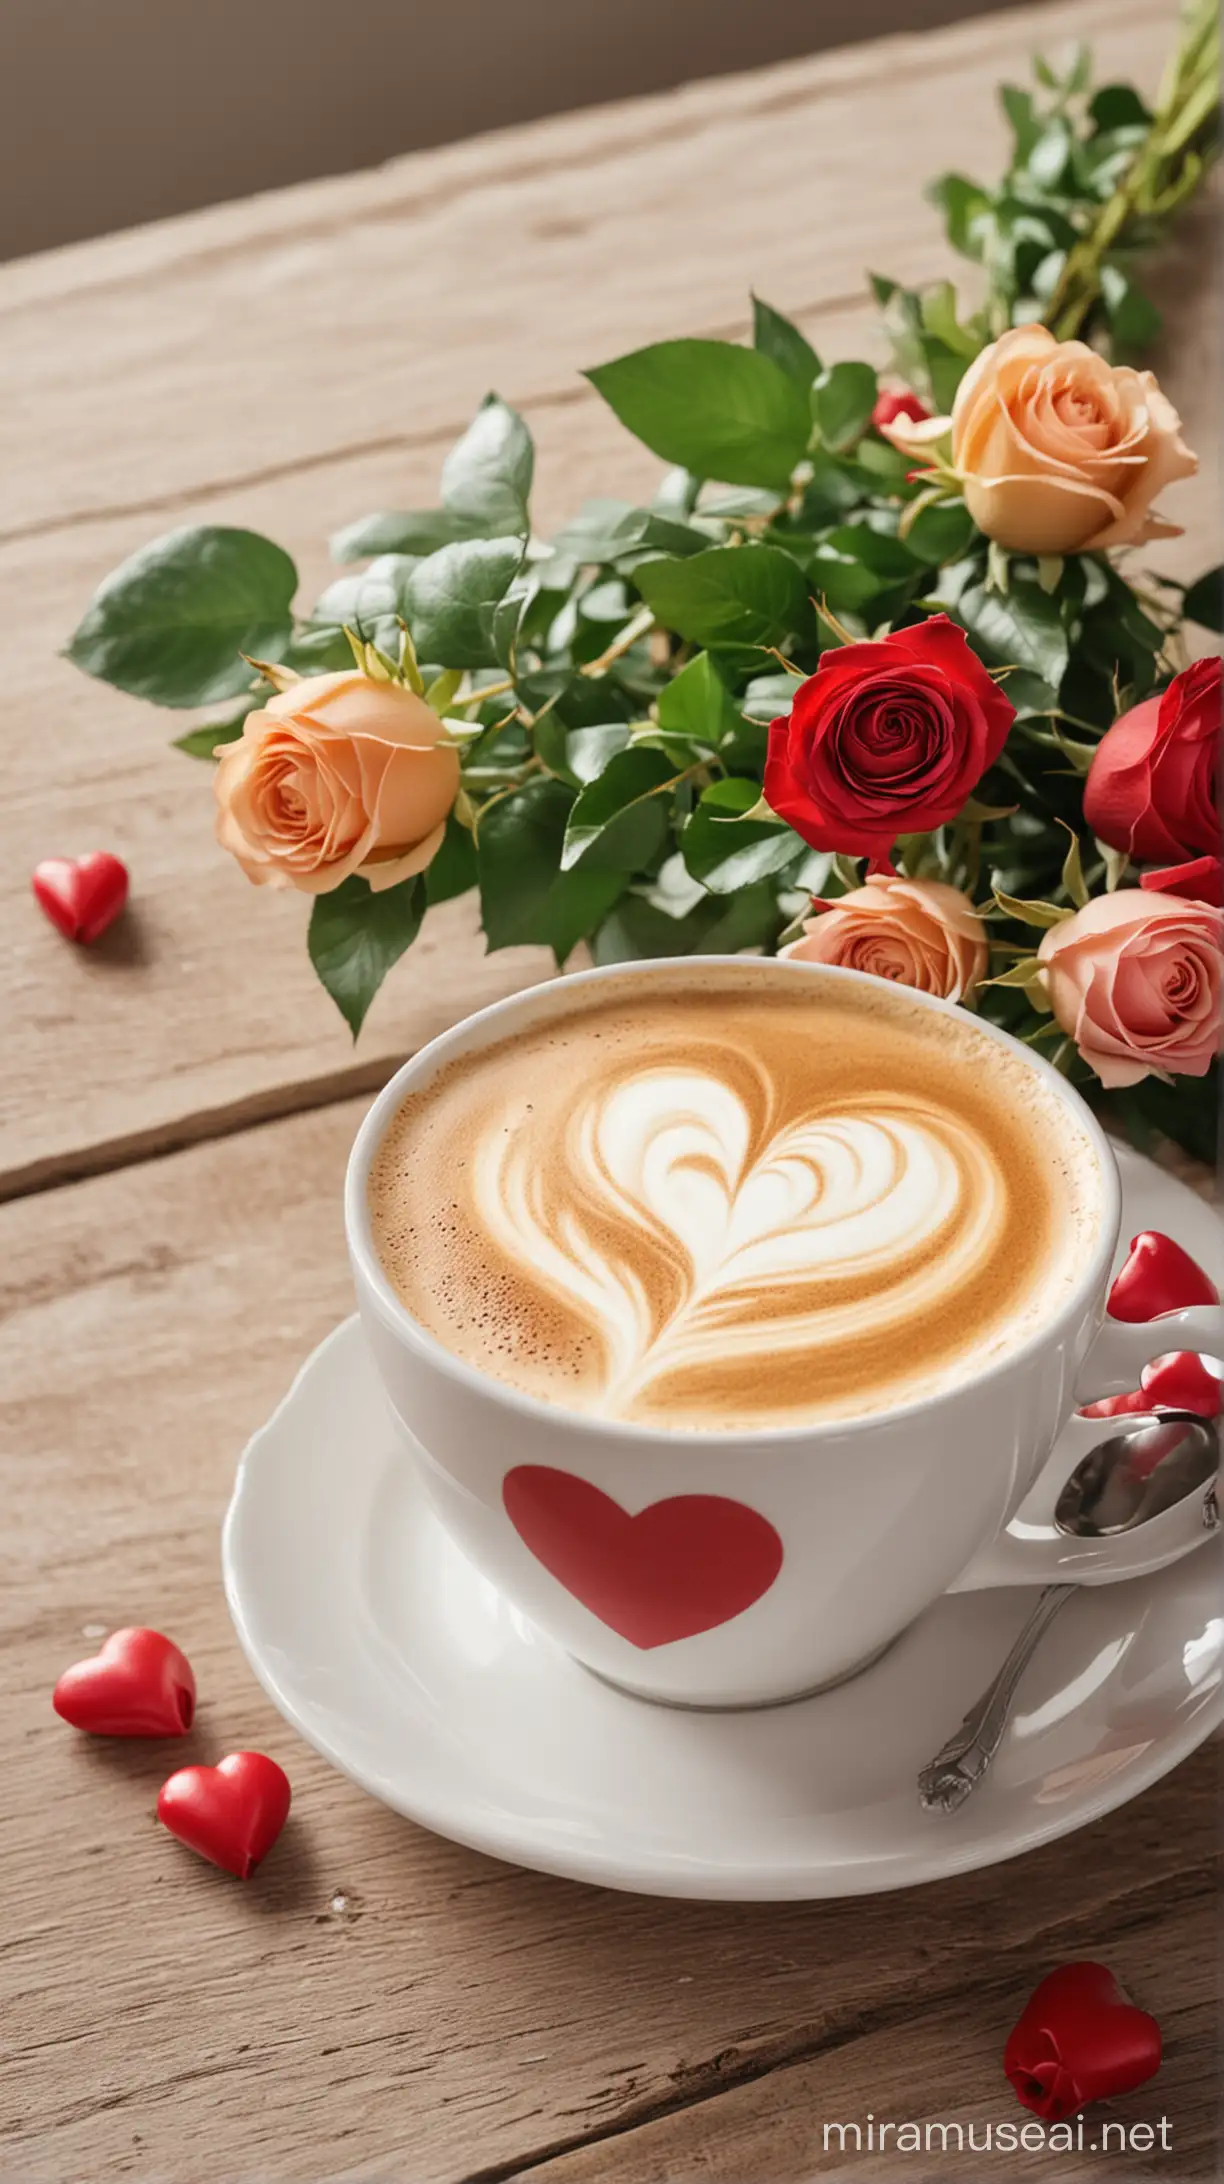 Cappuccino with Heart Latte Art and Rose Bouquet on a Morning Table